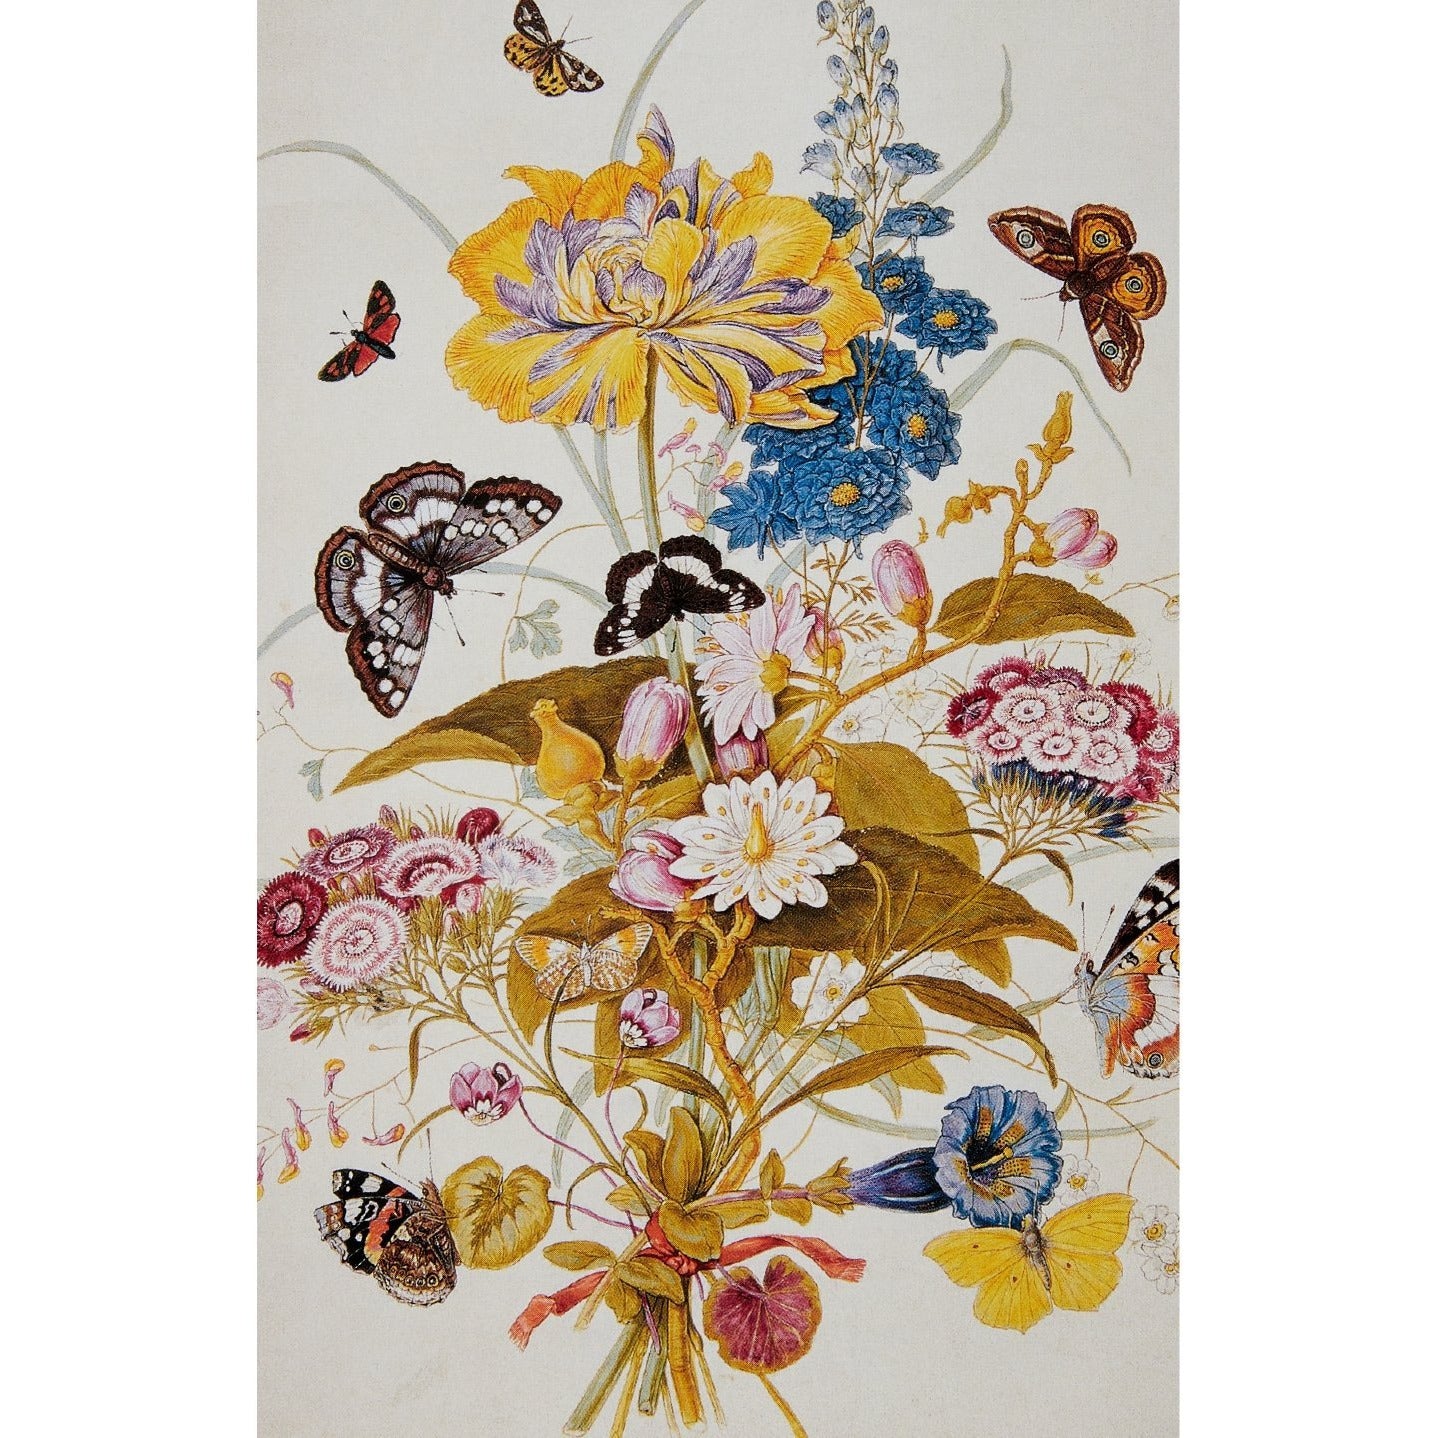 A bunch of ornamental flowers tied with ribbon, surrounded by moths and butterflies, by Thomas Robins the Elder. From the Broughton collection of The Fitzwilliam Museum, brought to you by CuratingCambridge.co.uk